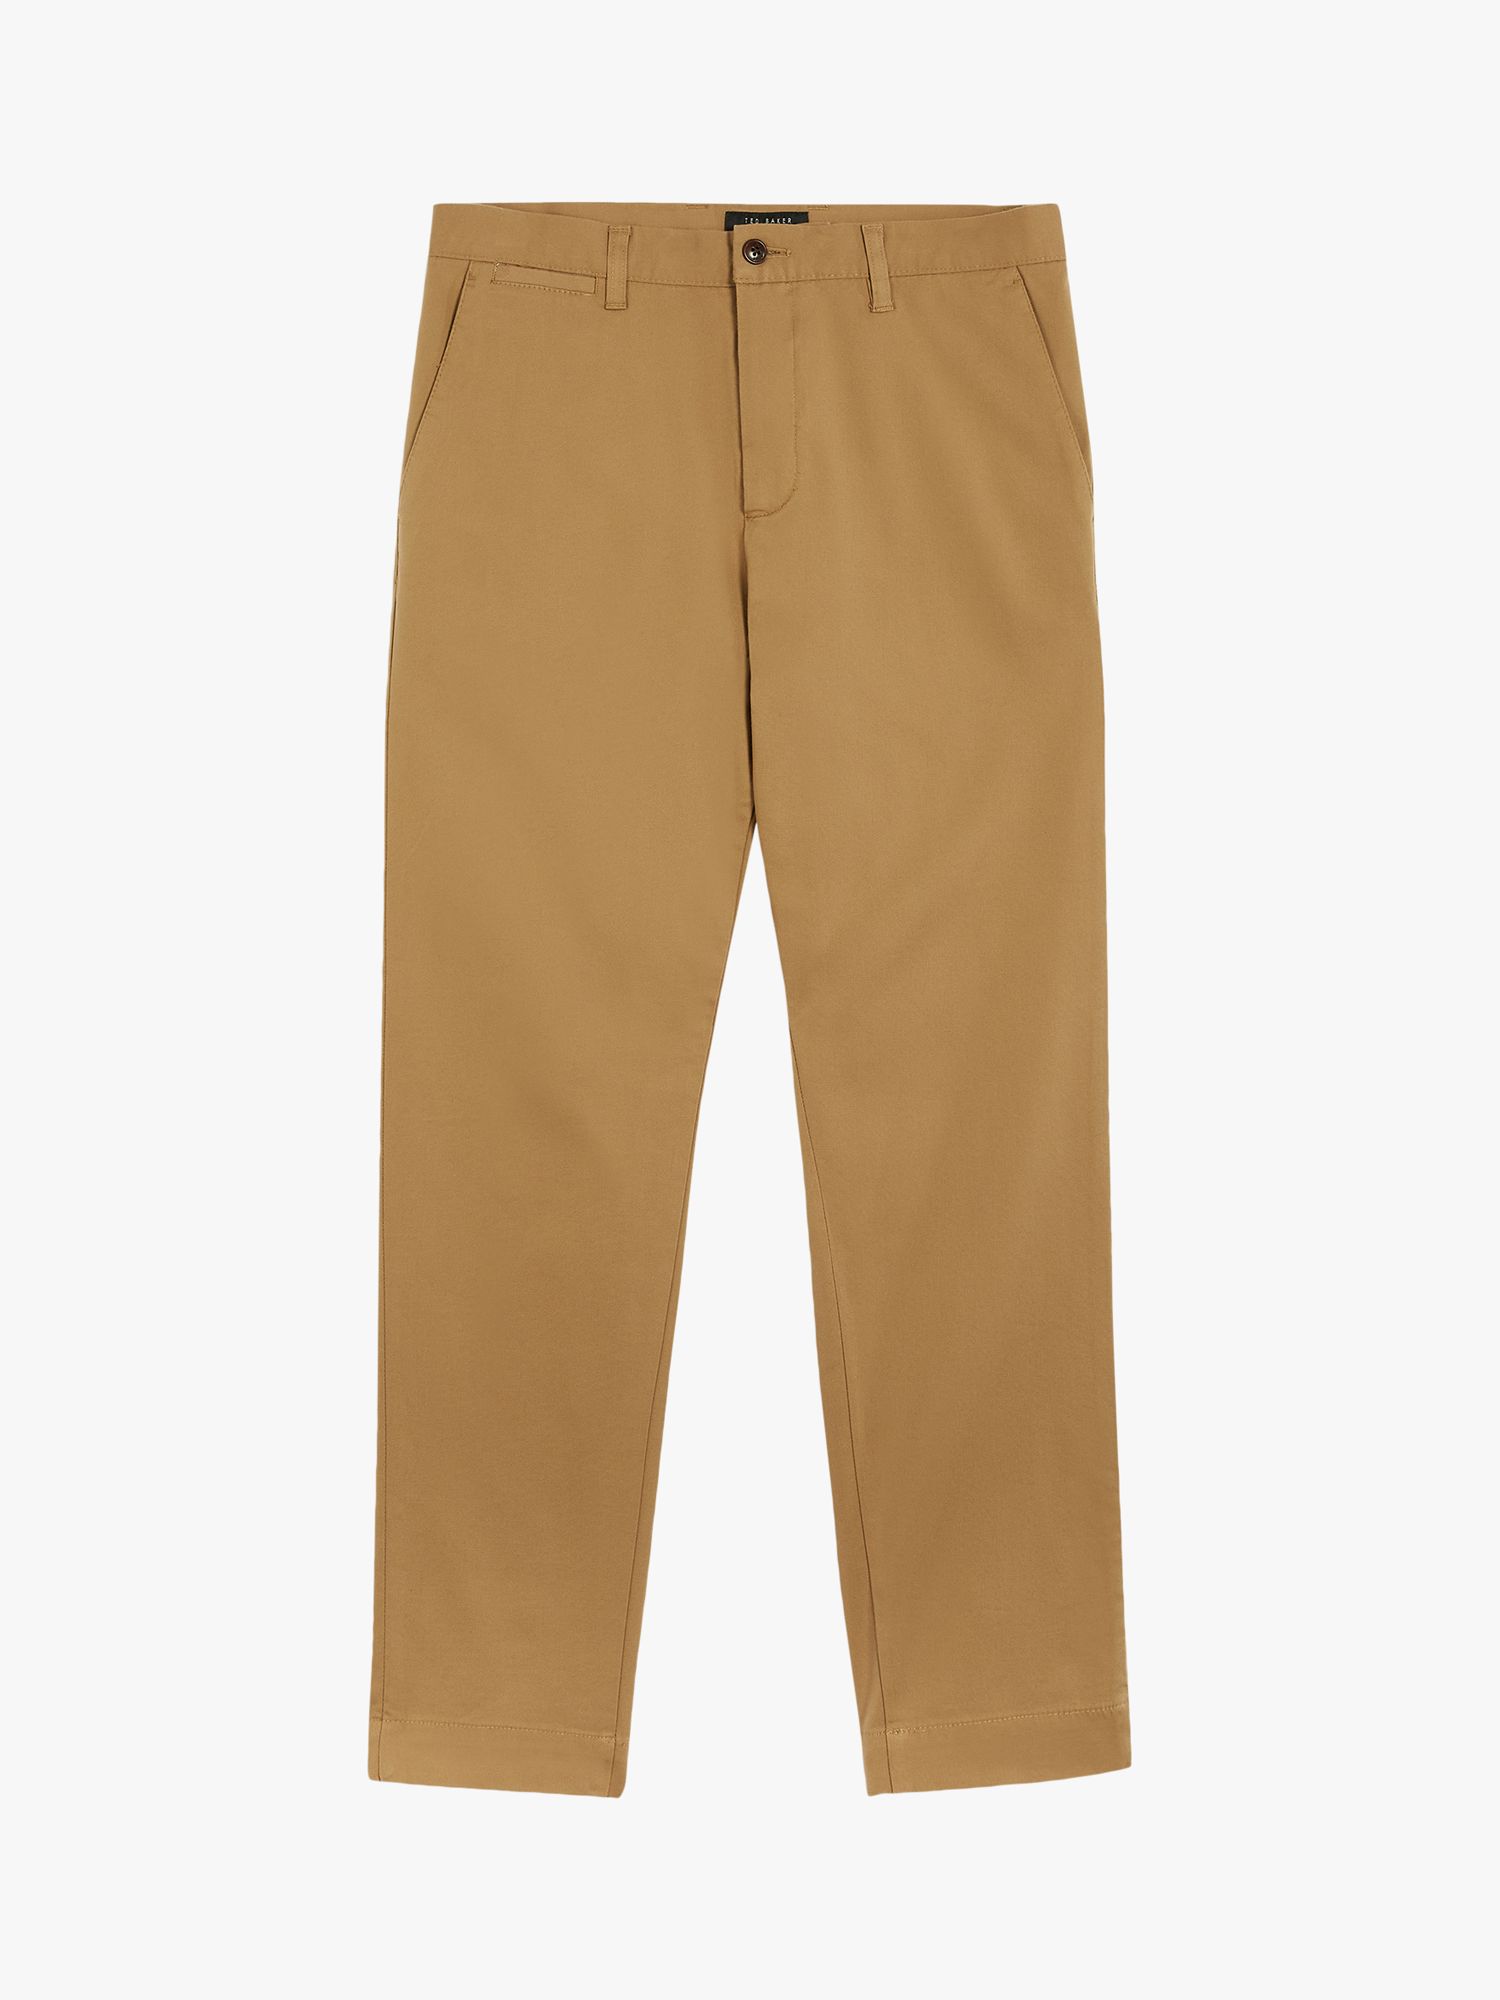 Ted Baker Genbee Cotton Lyocell Chinos, Natural, 34S